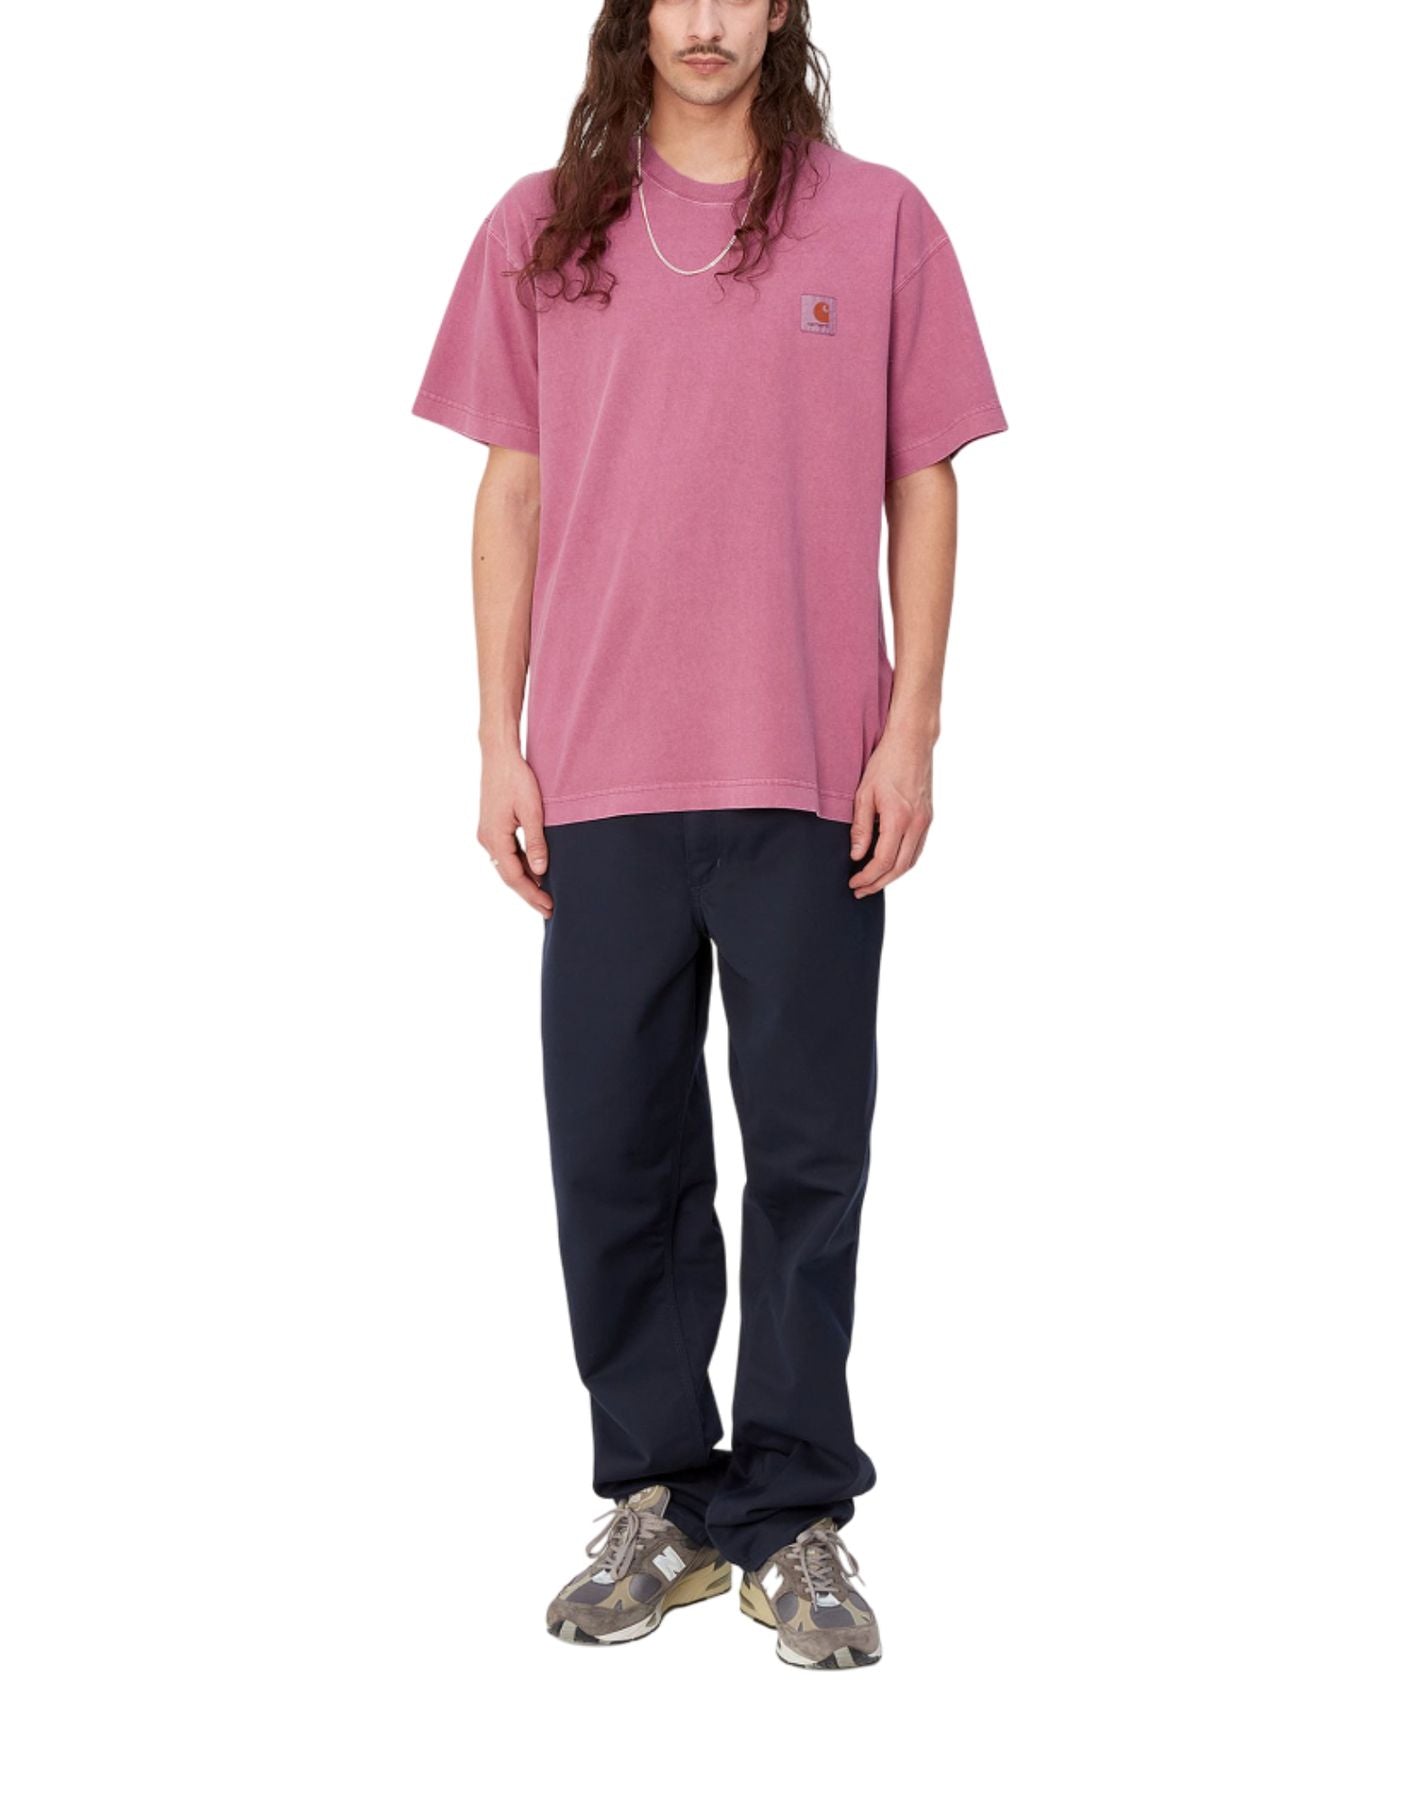 T-shirt pour homme I029949 1YT.GD pink CARHARTT WIP